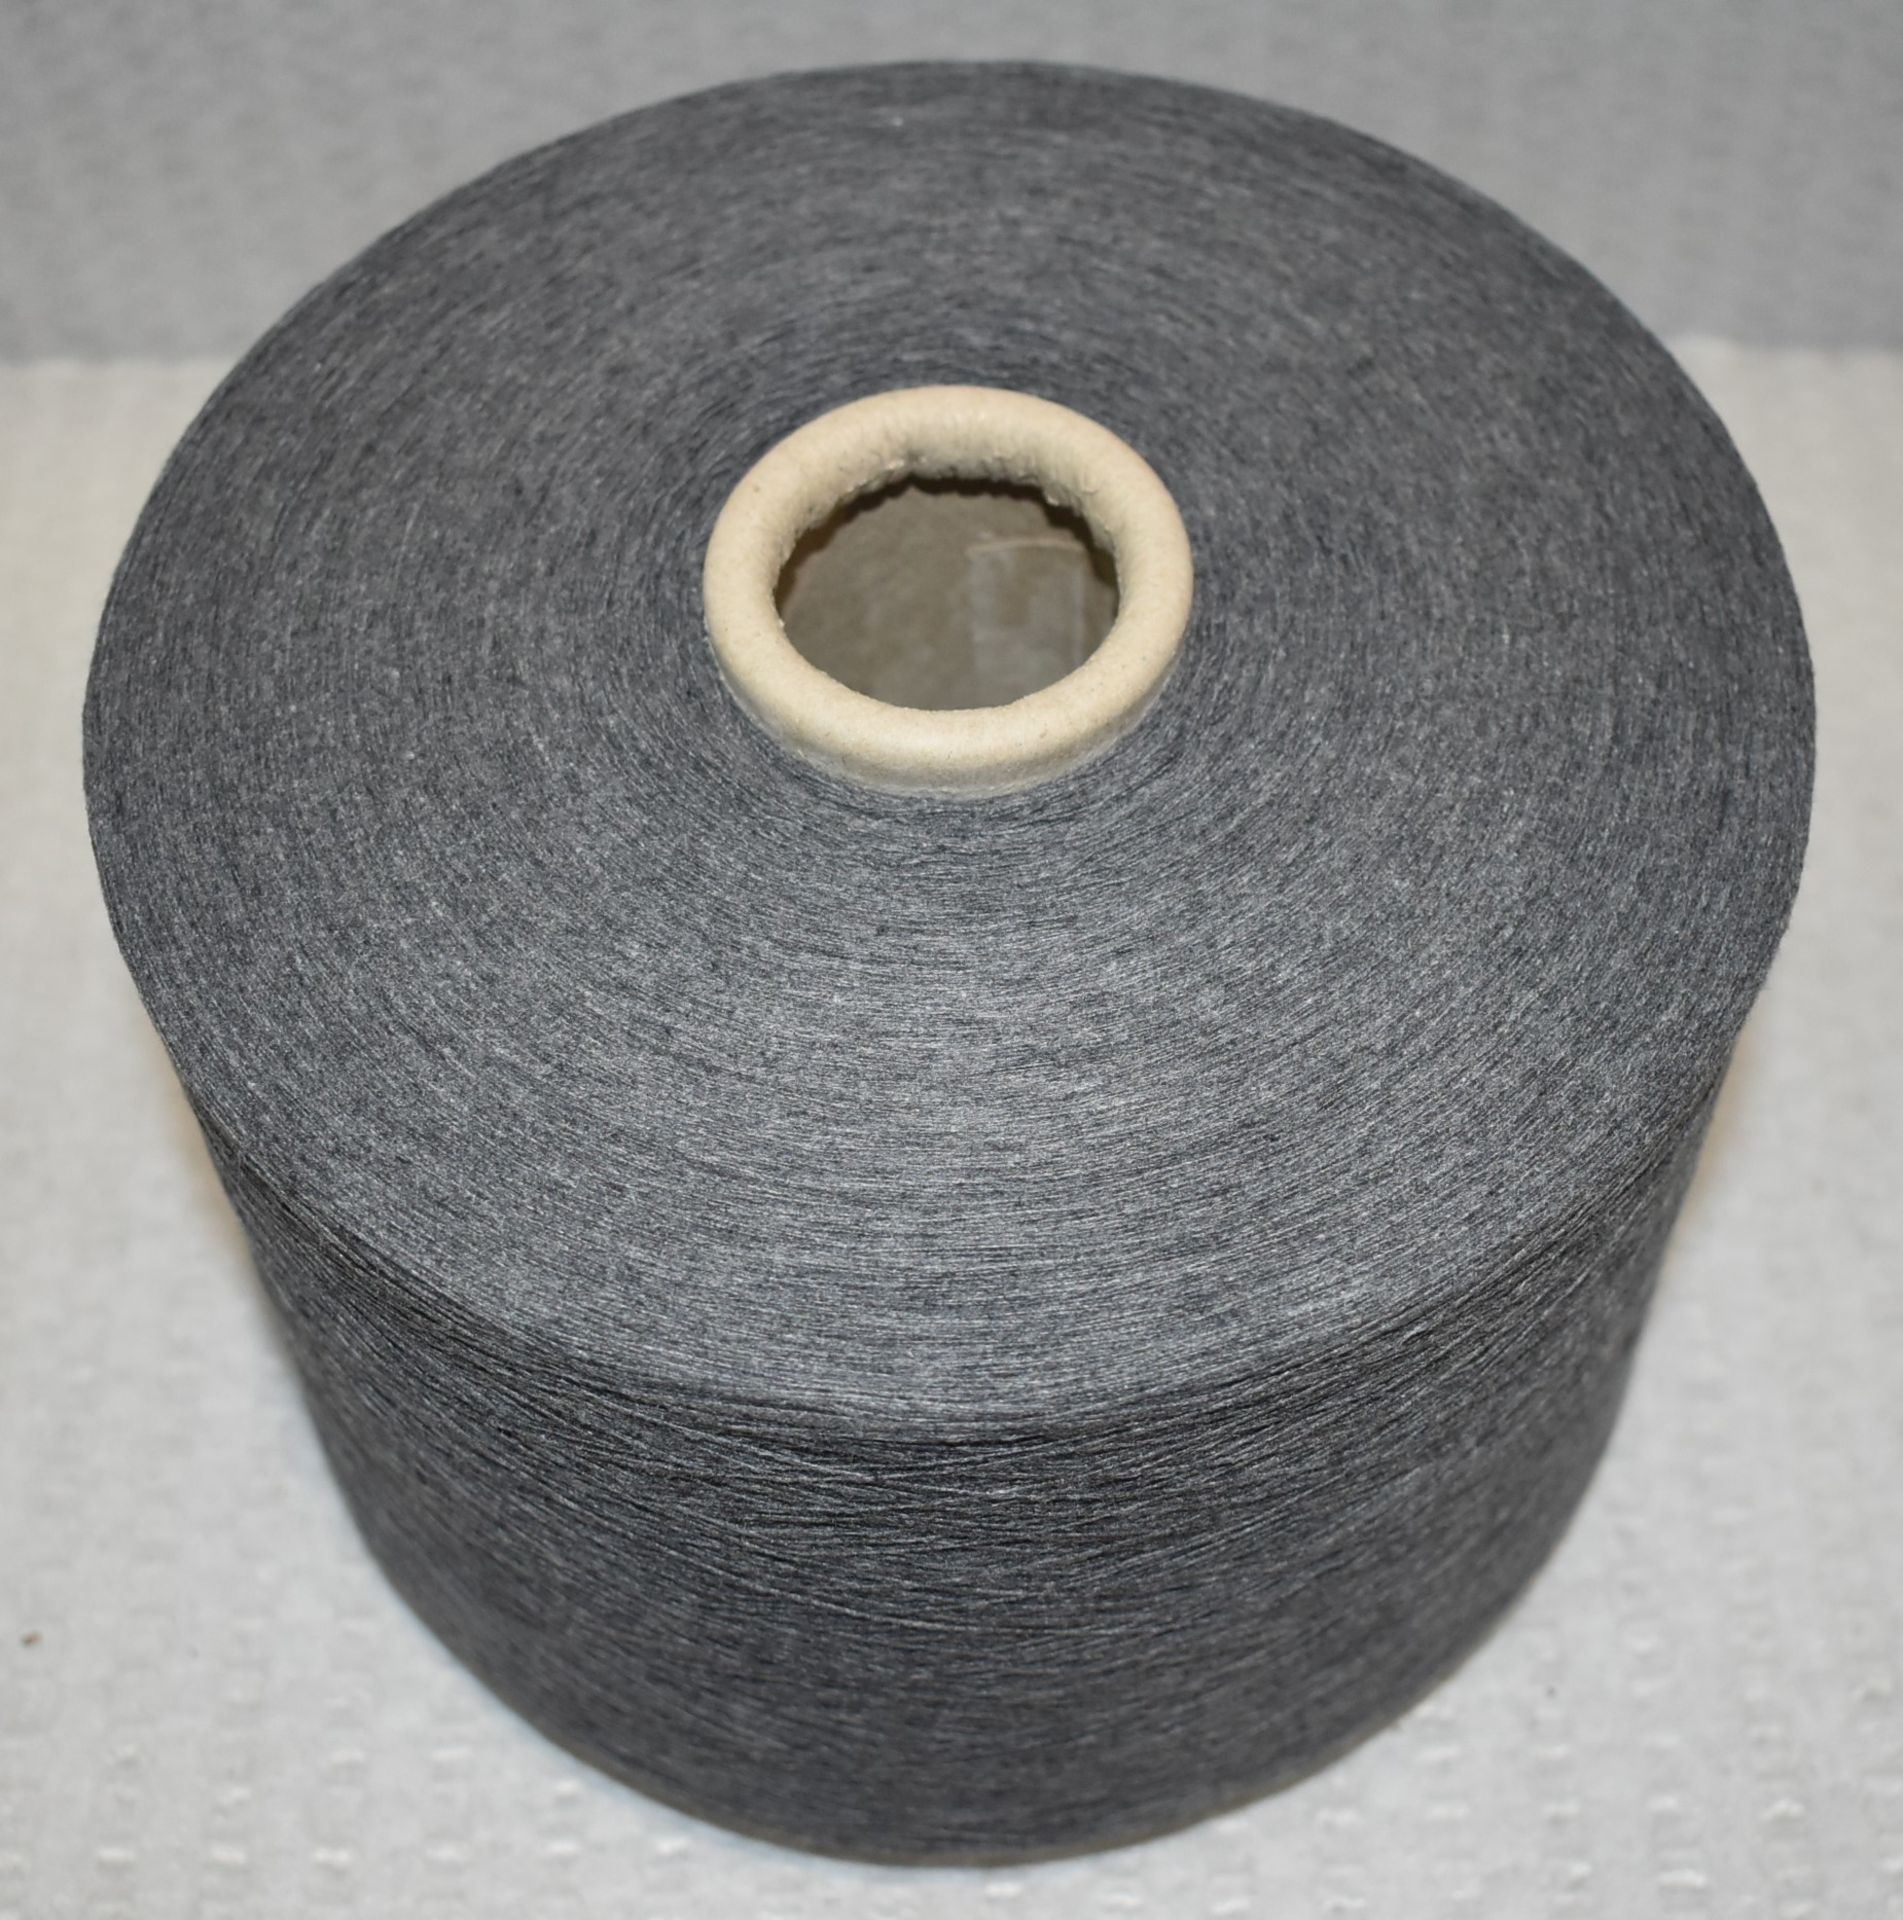 18 x Cones of 1/13 MicroCotton Knitting Yarn - Mid Grey - Approx Weight: 2,500g - New Stock ABL Yarn - Image 4 of 16